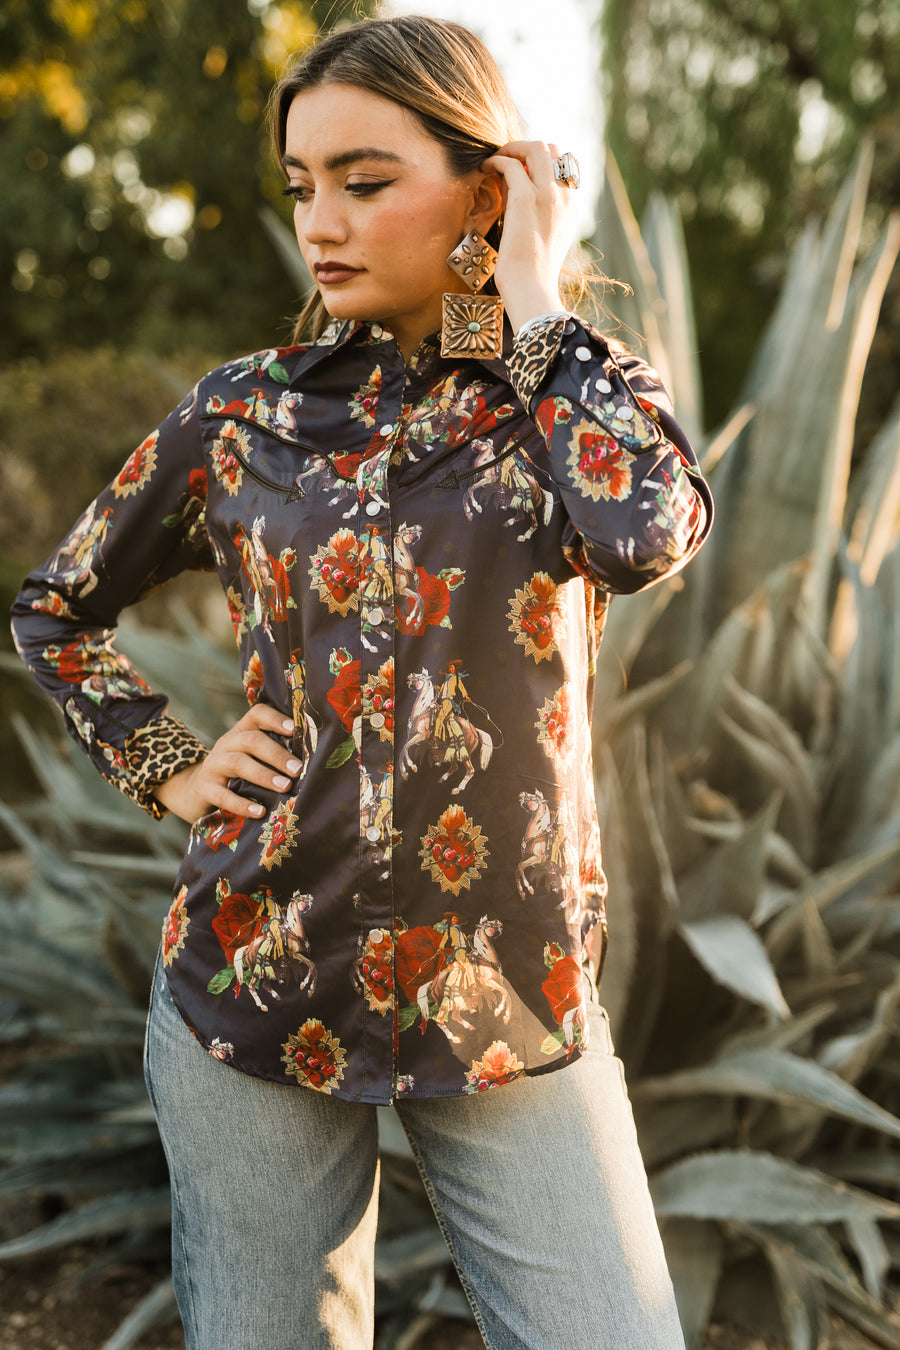 Rodeo Quincy | Women's Western Fashion Apparel